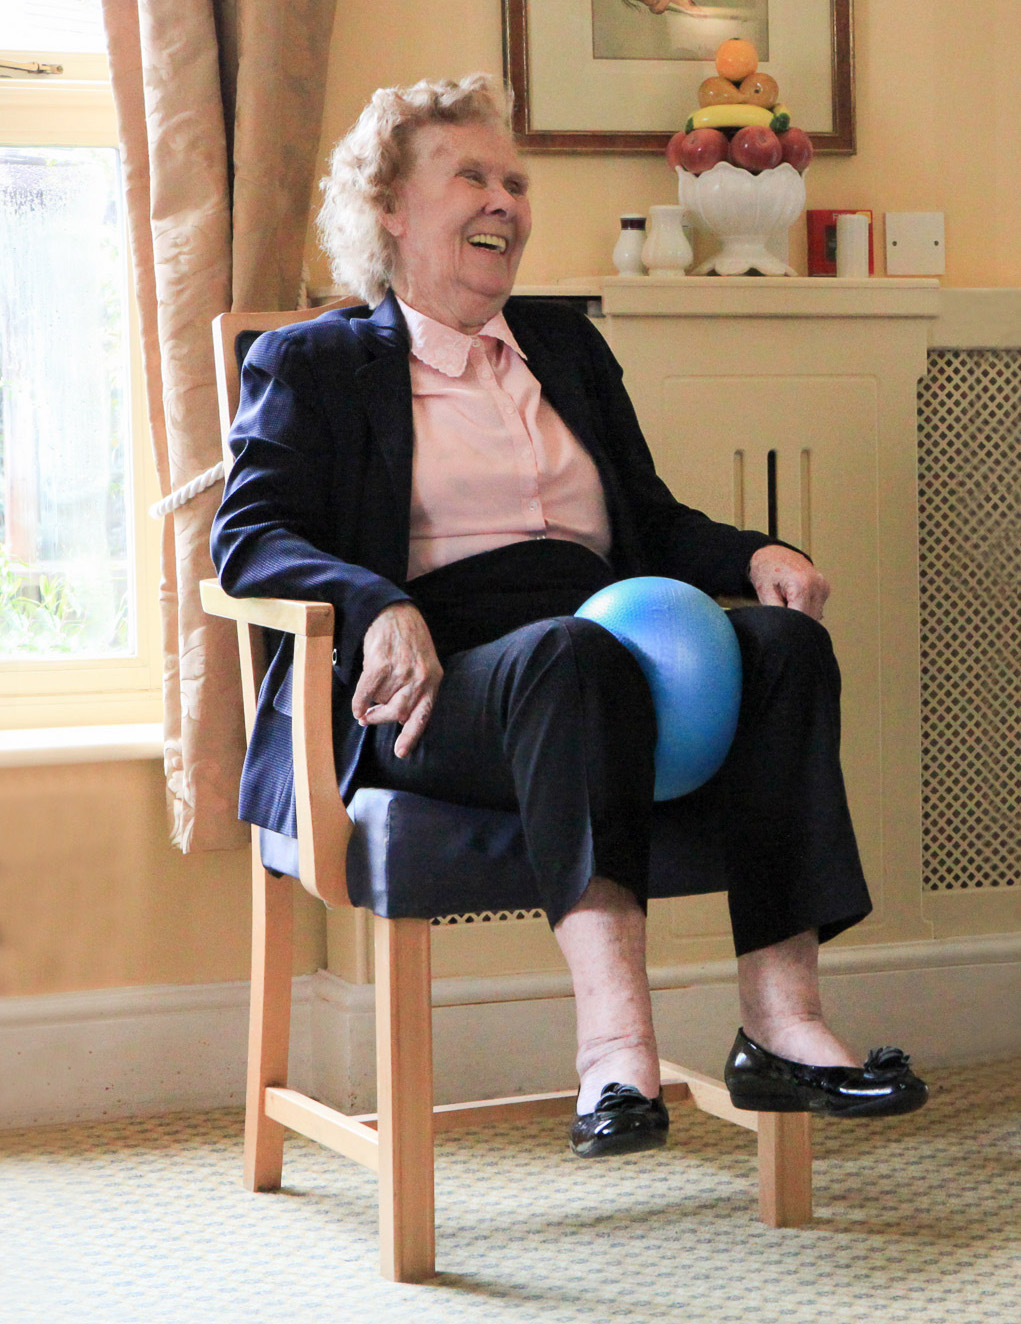 mobility-classes-for-care-homes-wiltshire-bath-somerset.jpg